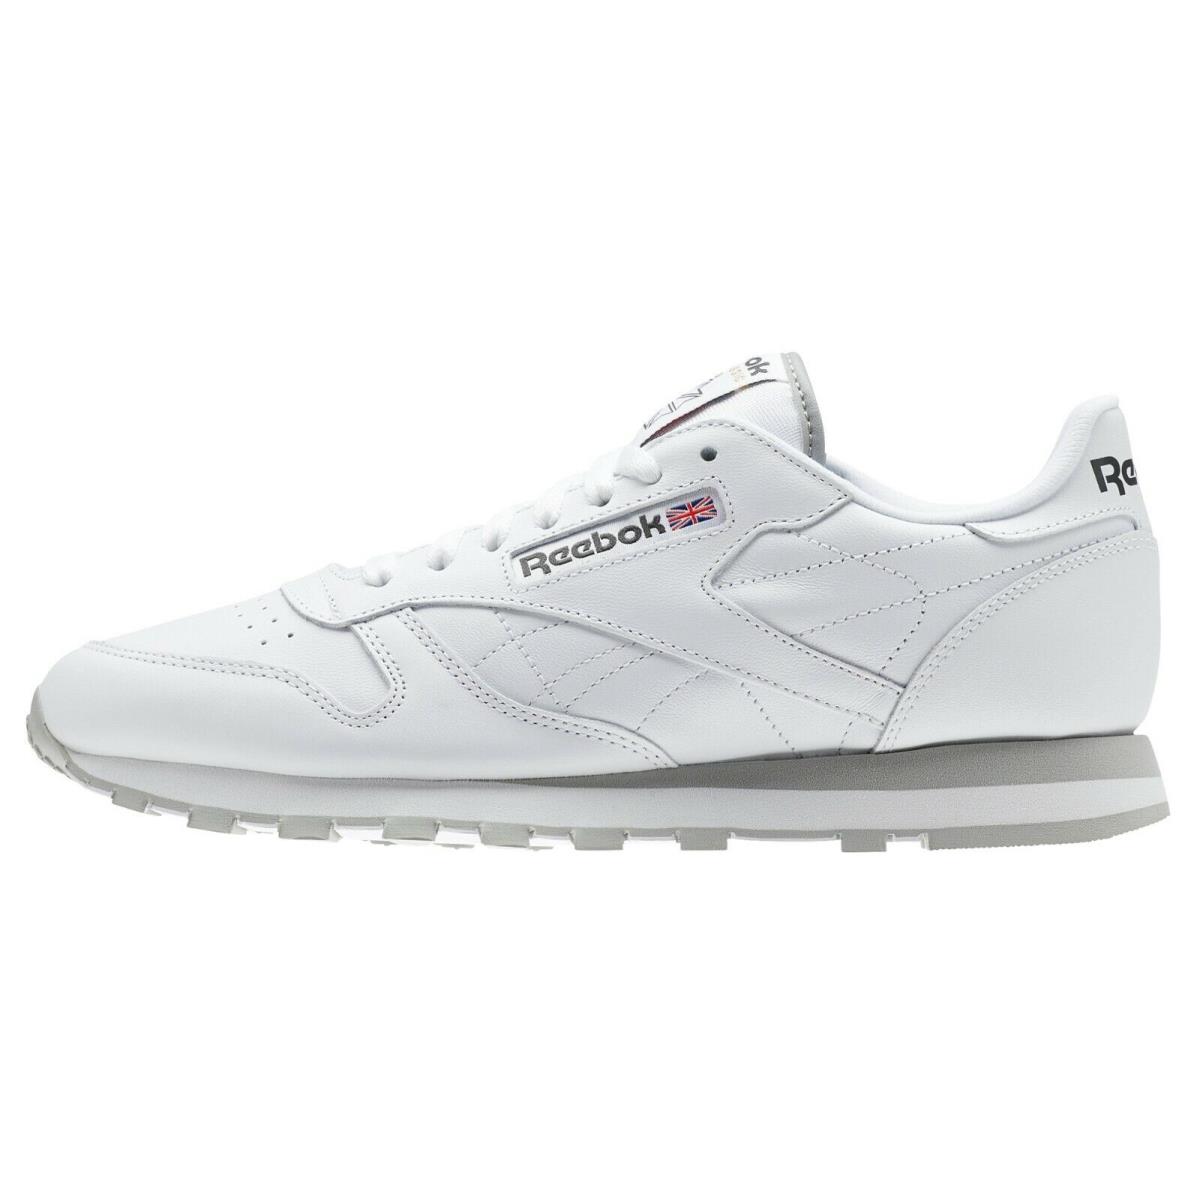 Reebok Men Classic Leather Running Shoes White 101